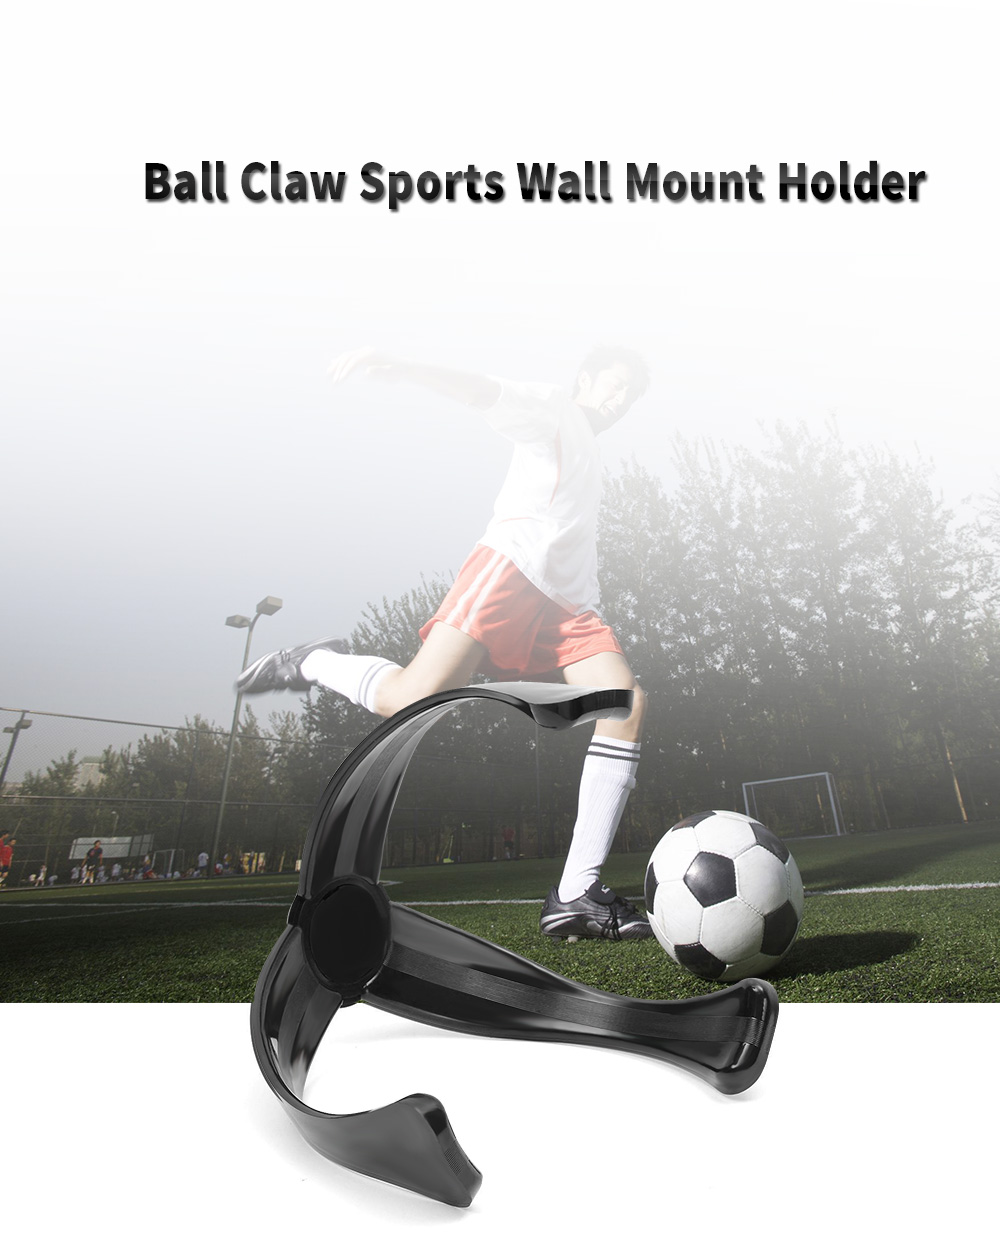 Space Saver Basketball Soccer Ball Claw Sports Wall Mount Holder